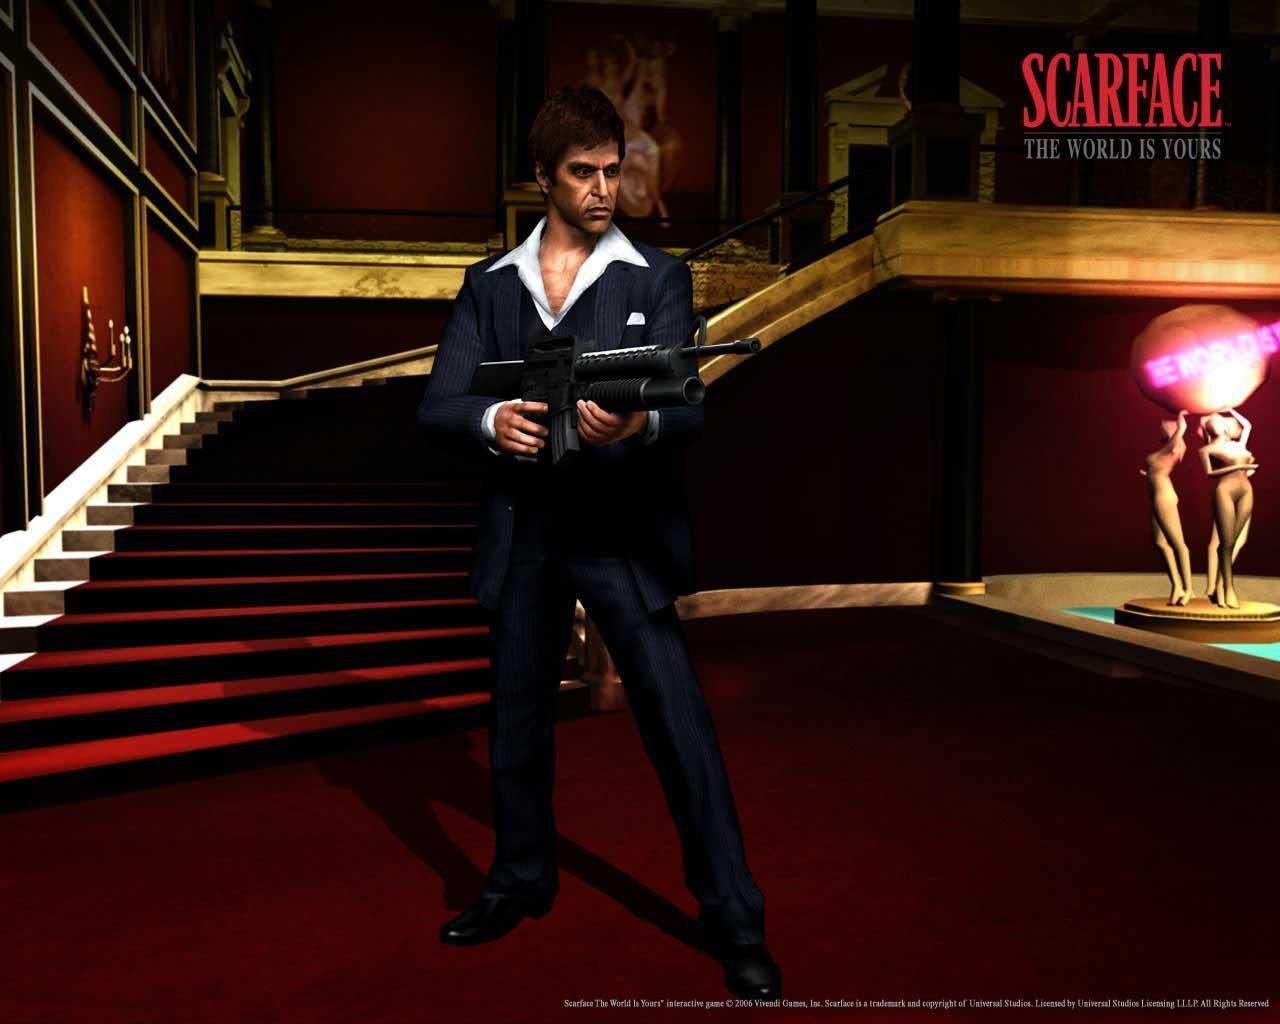 Scarface The World is Yours Wallpapers - Games Wallpapers